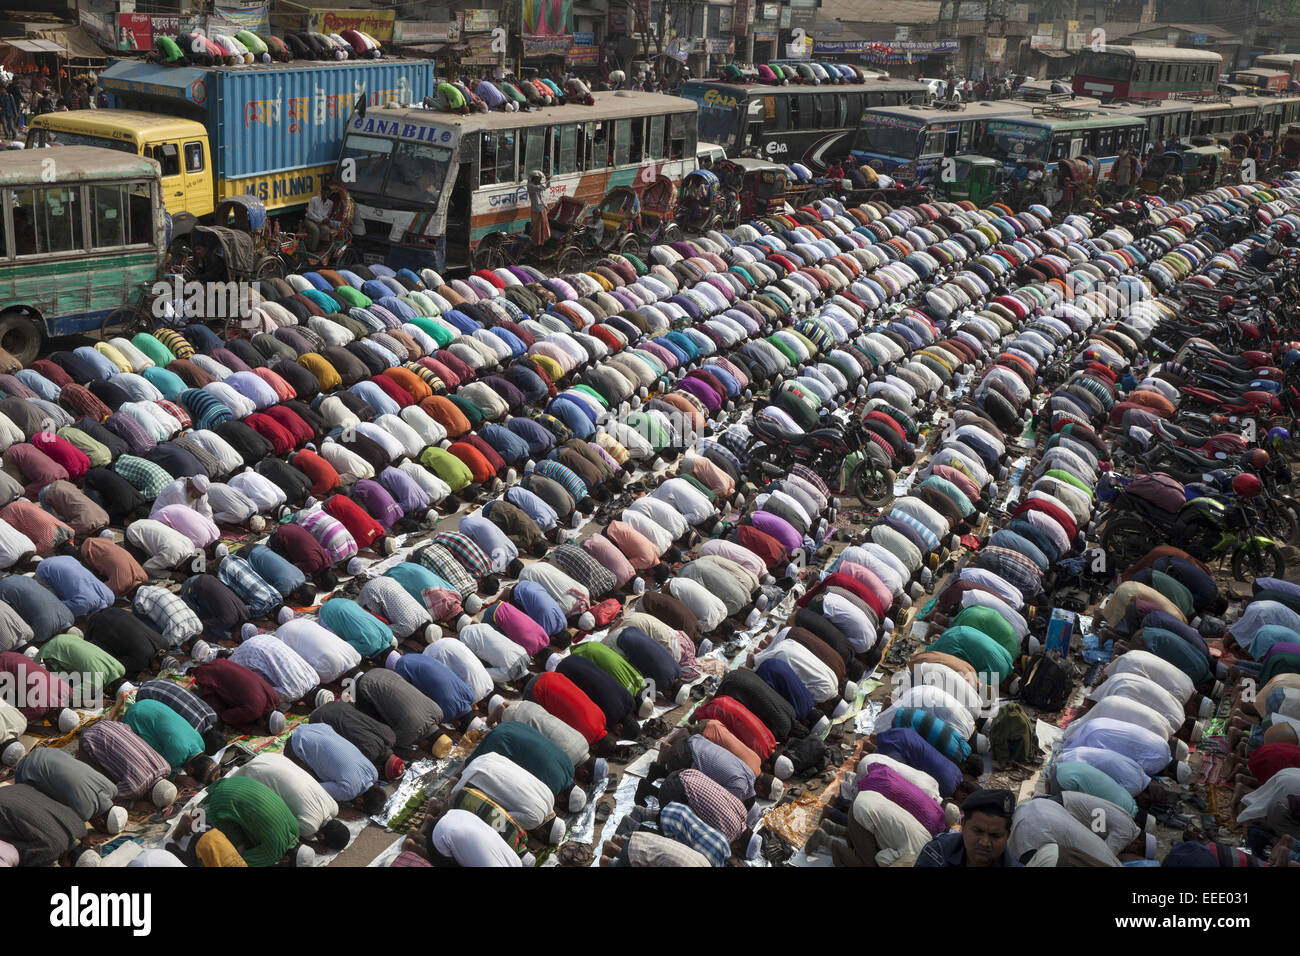 Dhaka, Bangladesh. 16th Jan, 2015. Muslim devotees offer Jumma prayers while attending the World Muslim Congregation, also known as Biswa Ijtema, at Tongi, on the outskirts of the Bangladesh capital Dhaka.Bangladesh's Biswa Ijtema, or World Muslim Congregation, is the world's second largest Islamic gathering after the Hajj with devotees coming from all over the globe to pray and hear imams preach for three days. Credit:  Zakir Hossain Chowdhury/ZUMA Wire/Alamy Live News Stock Photo